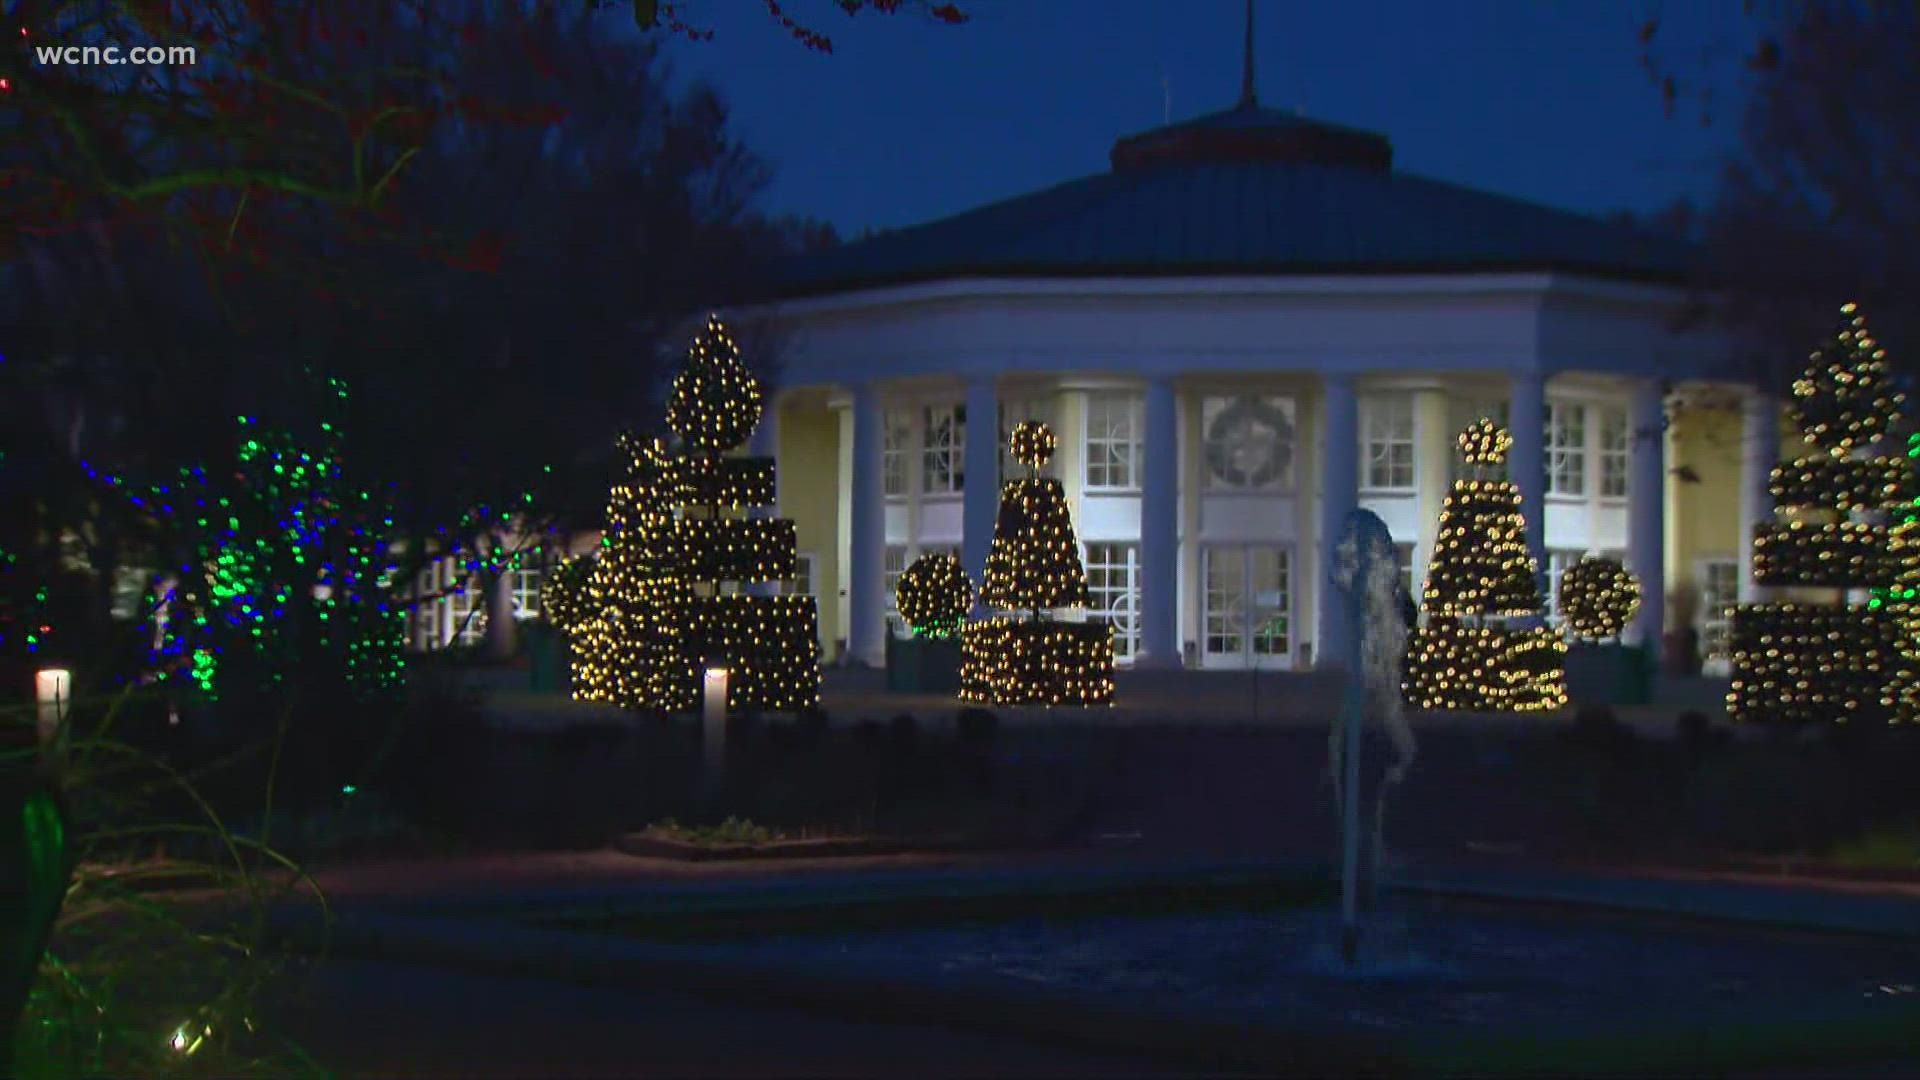 The Gaston County garden is decked out and lit up for the holidays through Jan. 5.